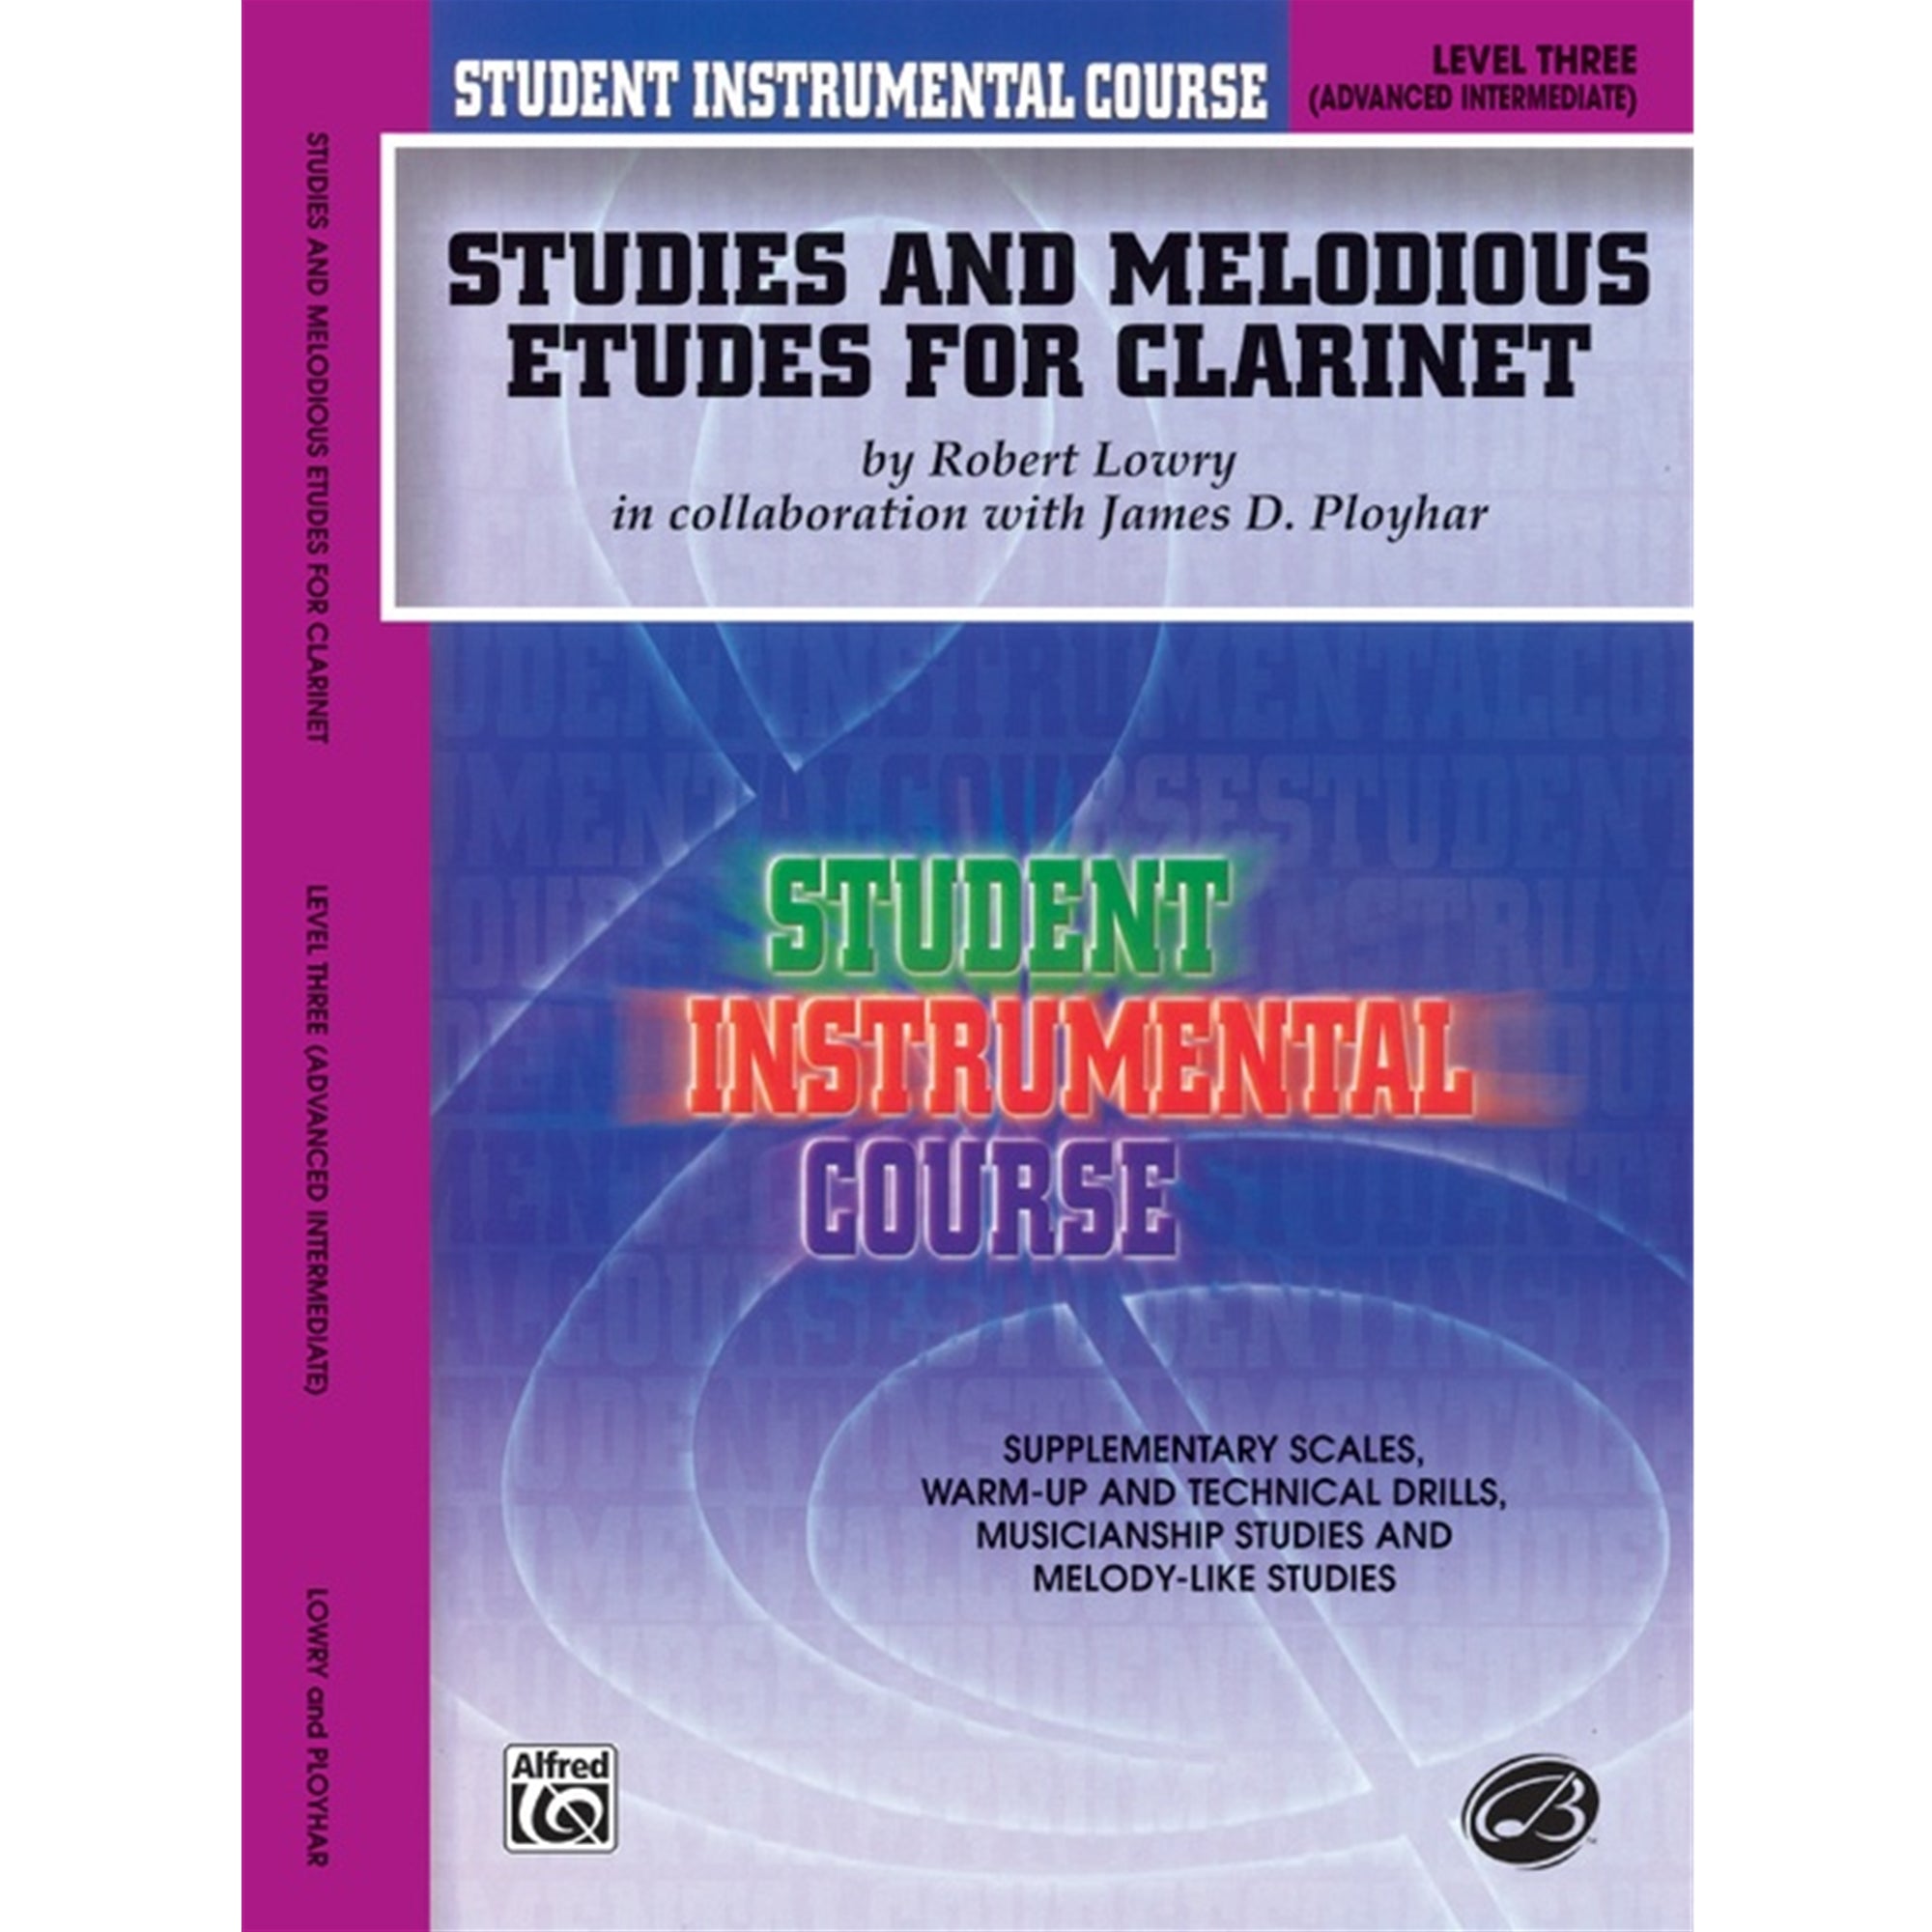 ALFRED BIC00307A Student Instrumental Course: Studies and Melodious Etudes for Clarinet, Level III [Clarinet]